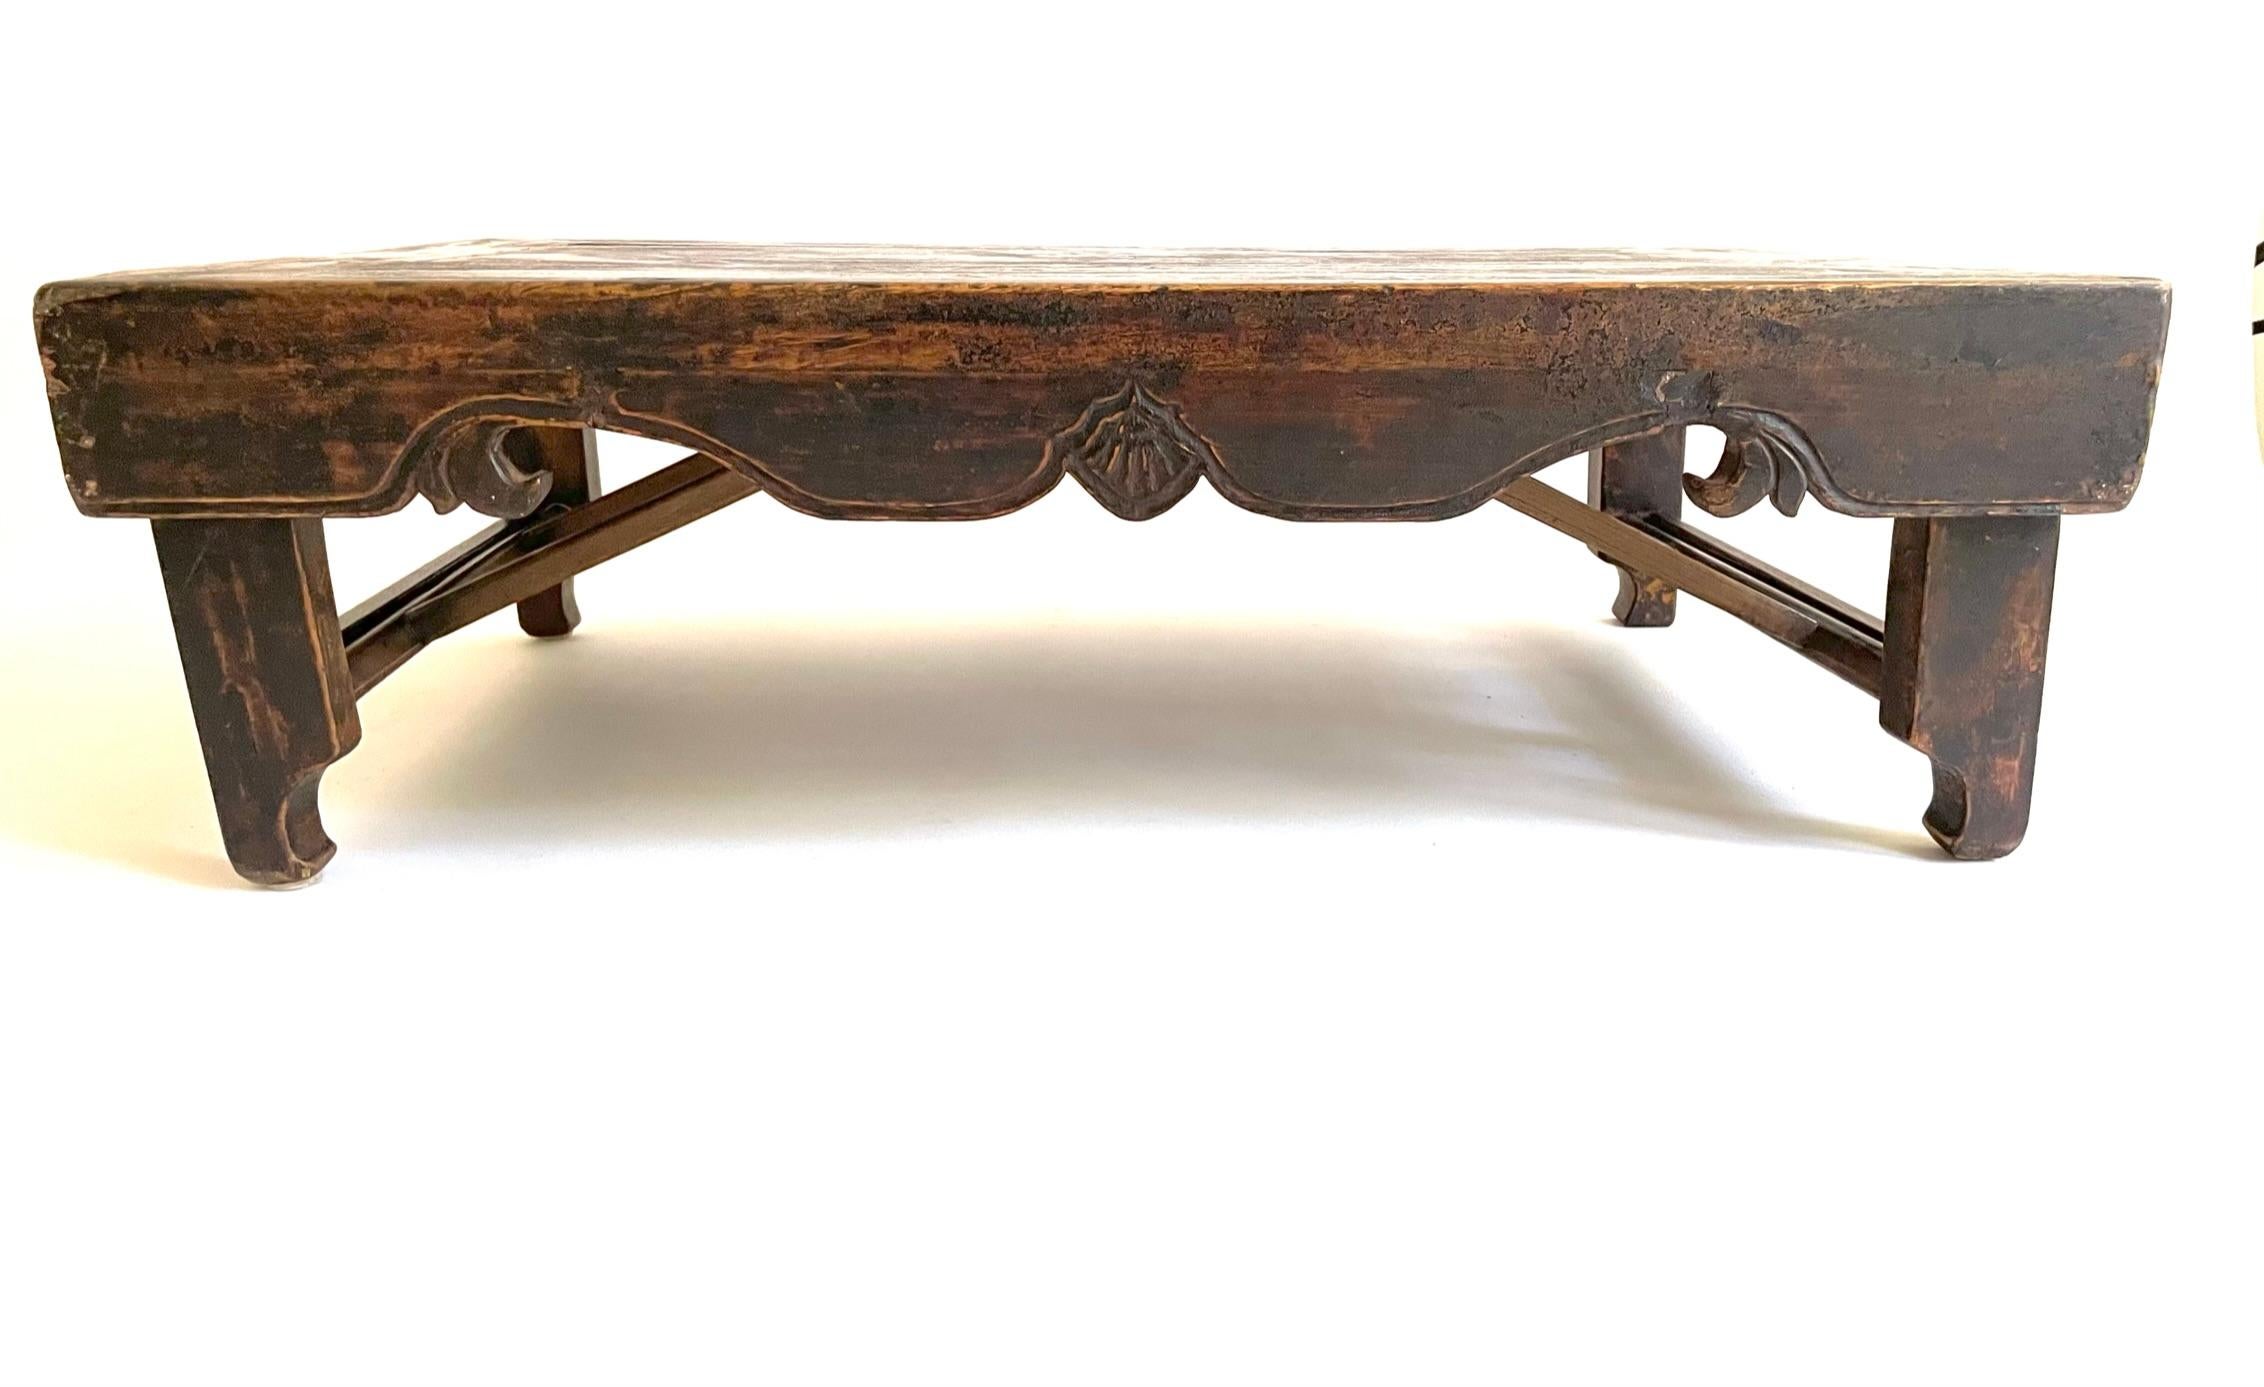 Rare 19th Century Chinese Folding Low Table 'Kang Table' For Sale 11